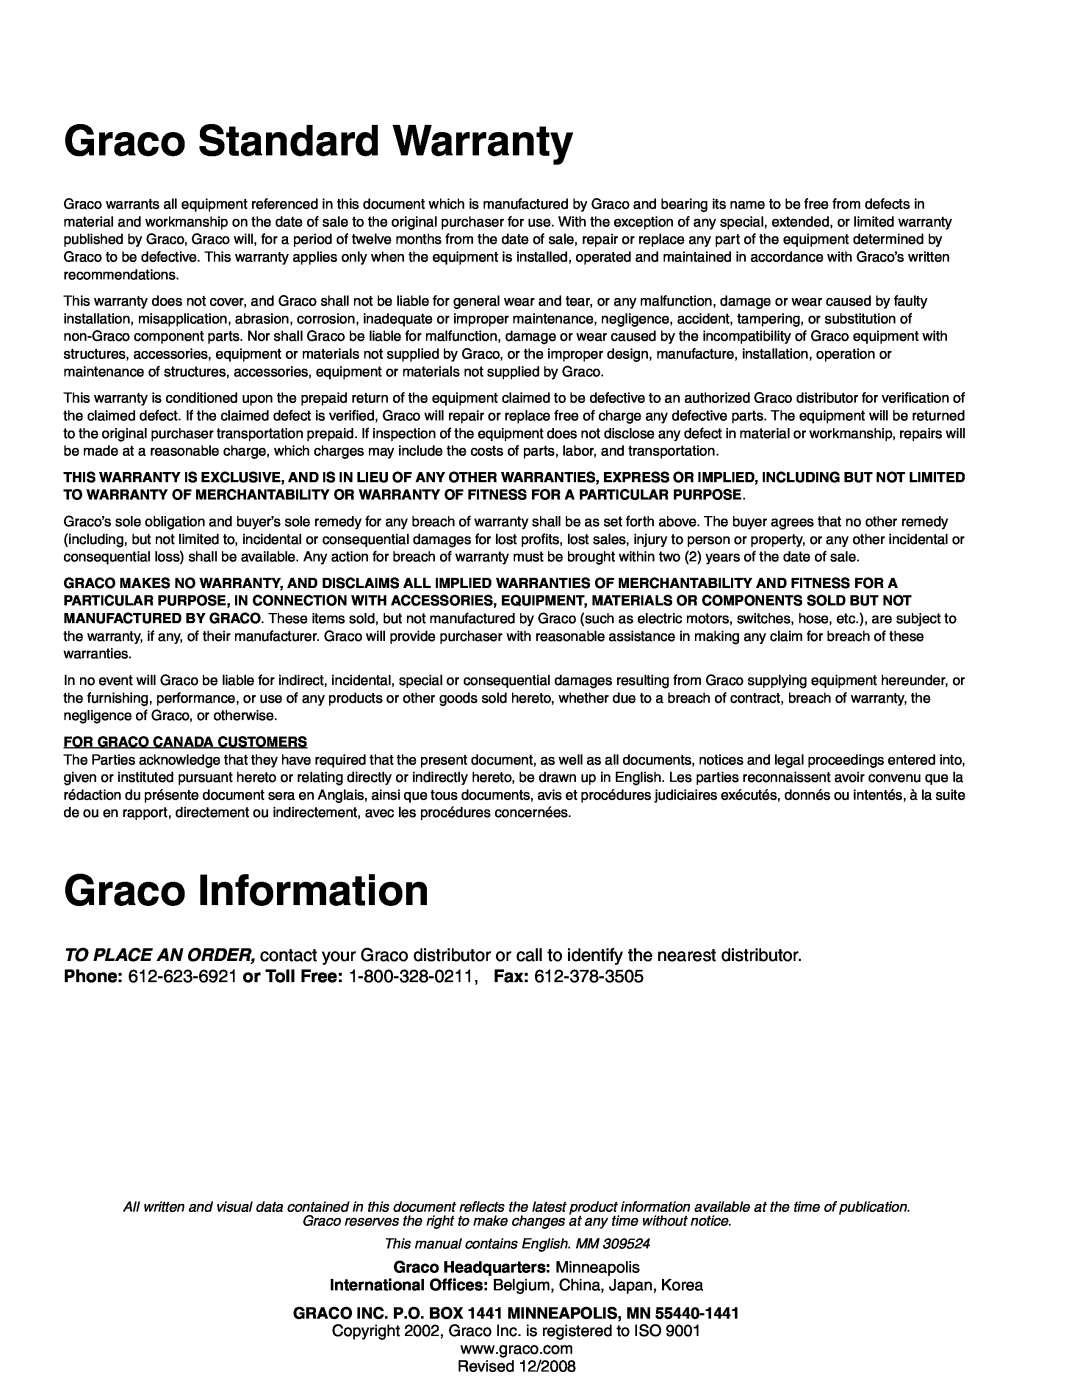 Graco 309524L important safety instructions Graco Standard Warranty, Graco Information, Graco Headquarters Minneapolis 